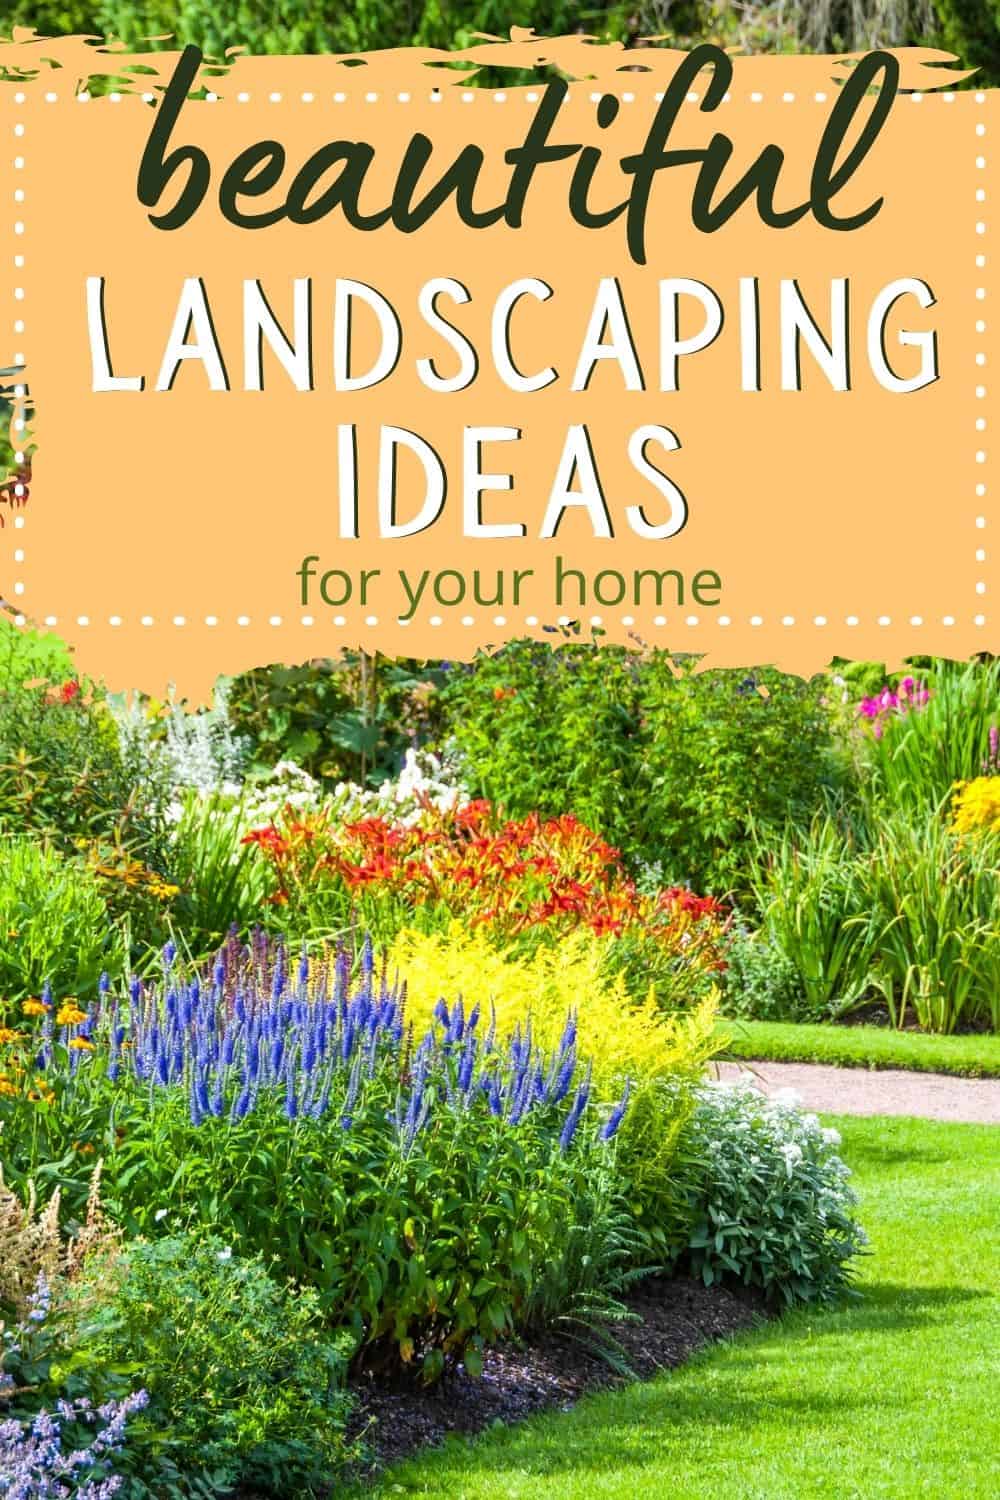 Beautiful landscaping ideas for your home